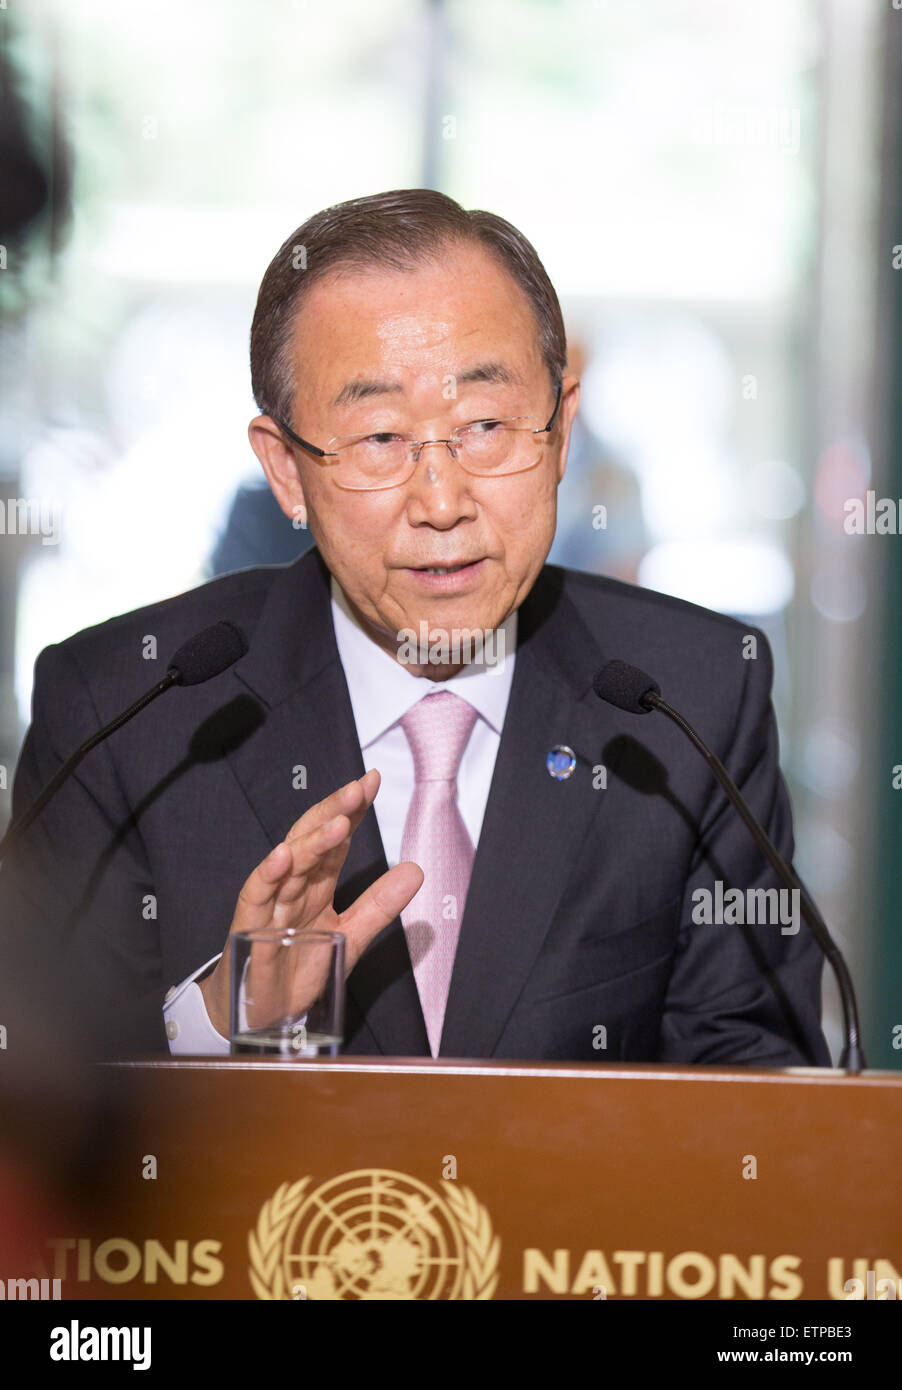 (150615) -- GENEVA, June 15, 2015 (Xinhua) -- UN Secretary-General Ban Ki-moon holds a press conference after meeting representatives of the Yemeni government in Geneva, Switzerland, on June 15, 2015. Ban Ki-moon warned on Monday after holding meetings with representatives of the Yemeni government and the Group of 16 plus that "in Yemen's case, the ticking clock is not a time-piece, it's a time-bomb." (Xinhua/Xu Jinquan) Stock Photo